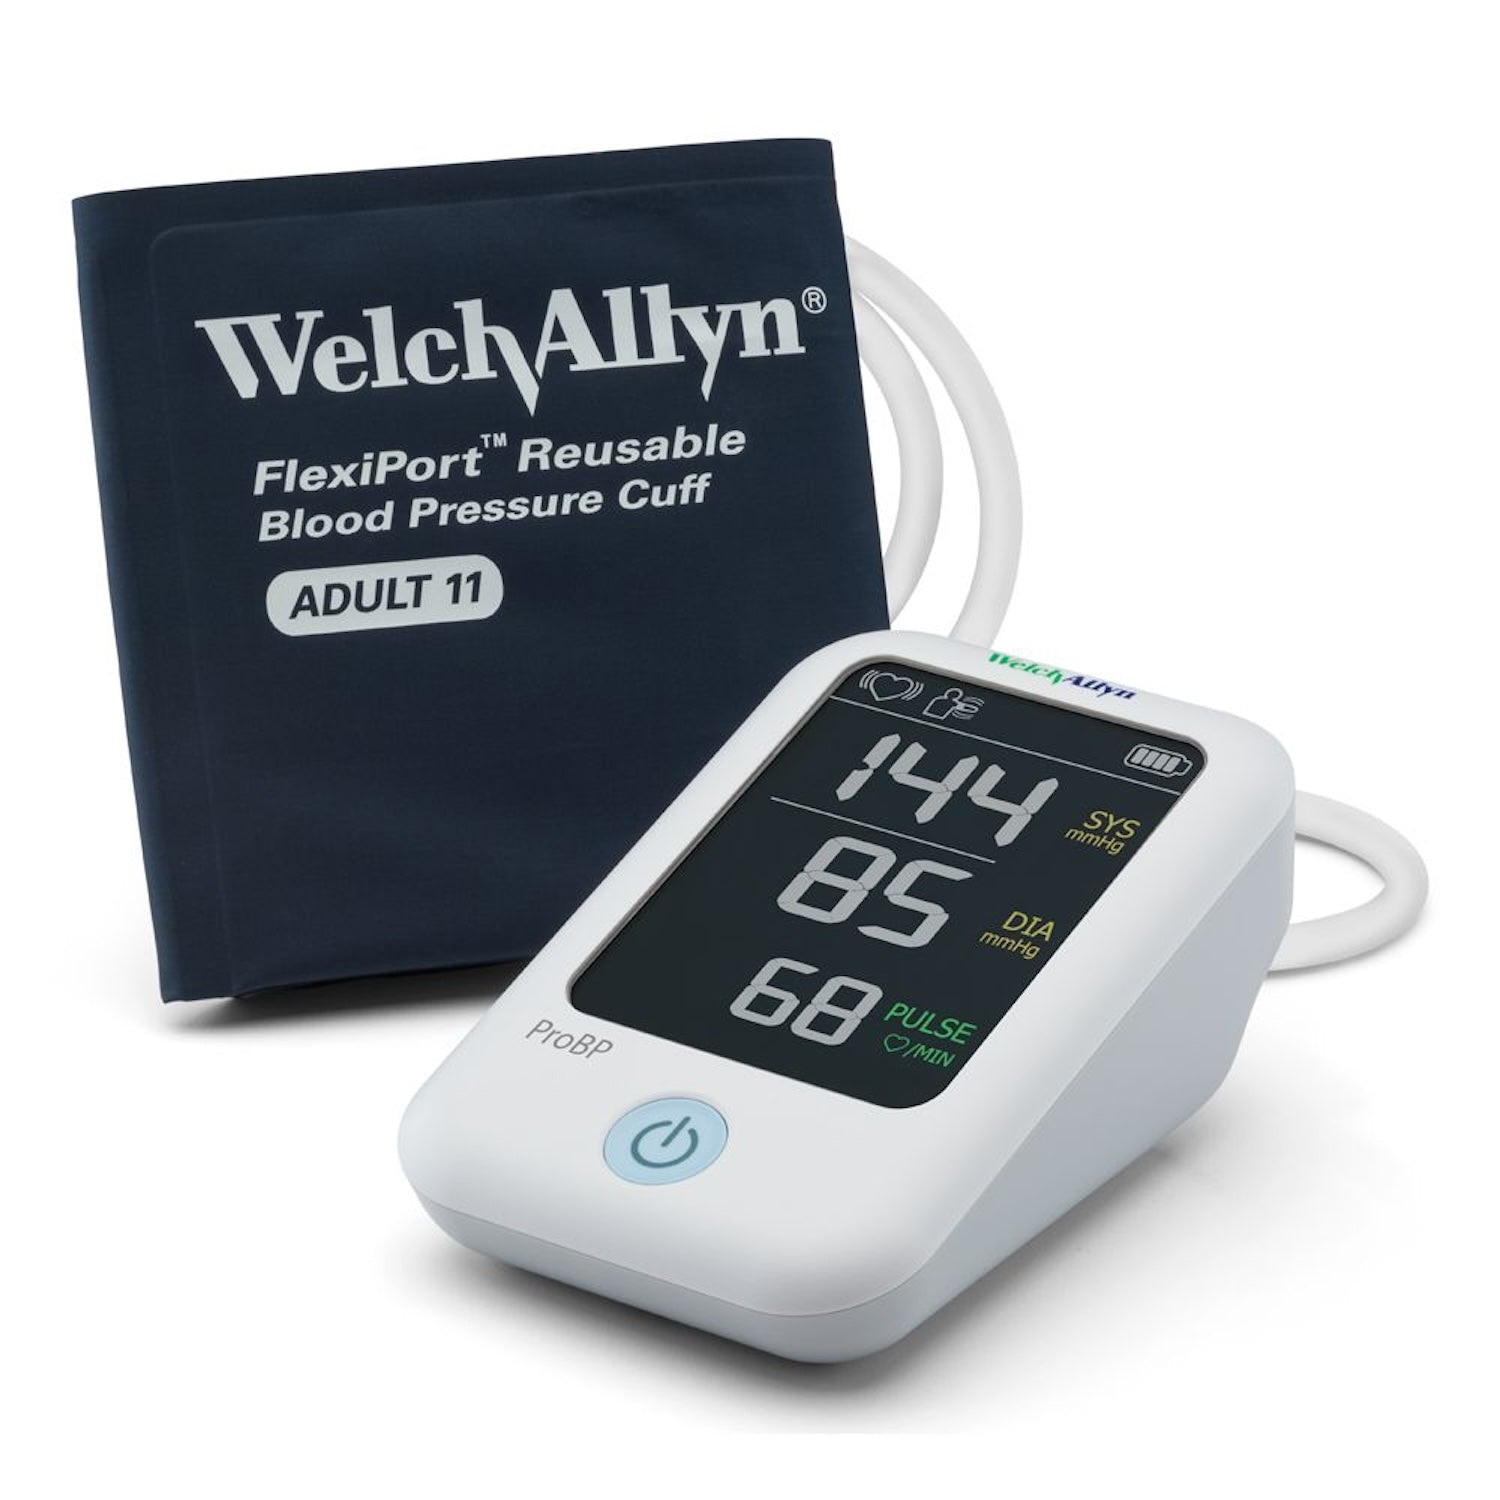 Welch Allyn ProBP 2000 BP unit with size 11 Adult FlexiPort Reusable BP Cuff & power supply